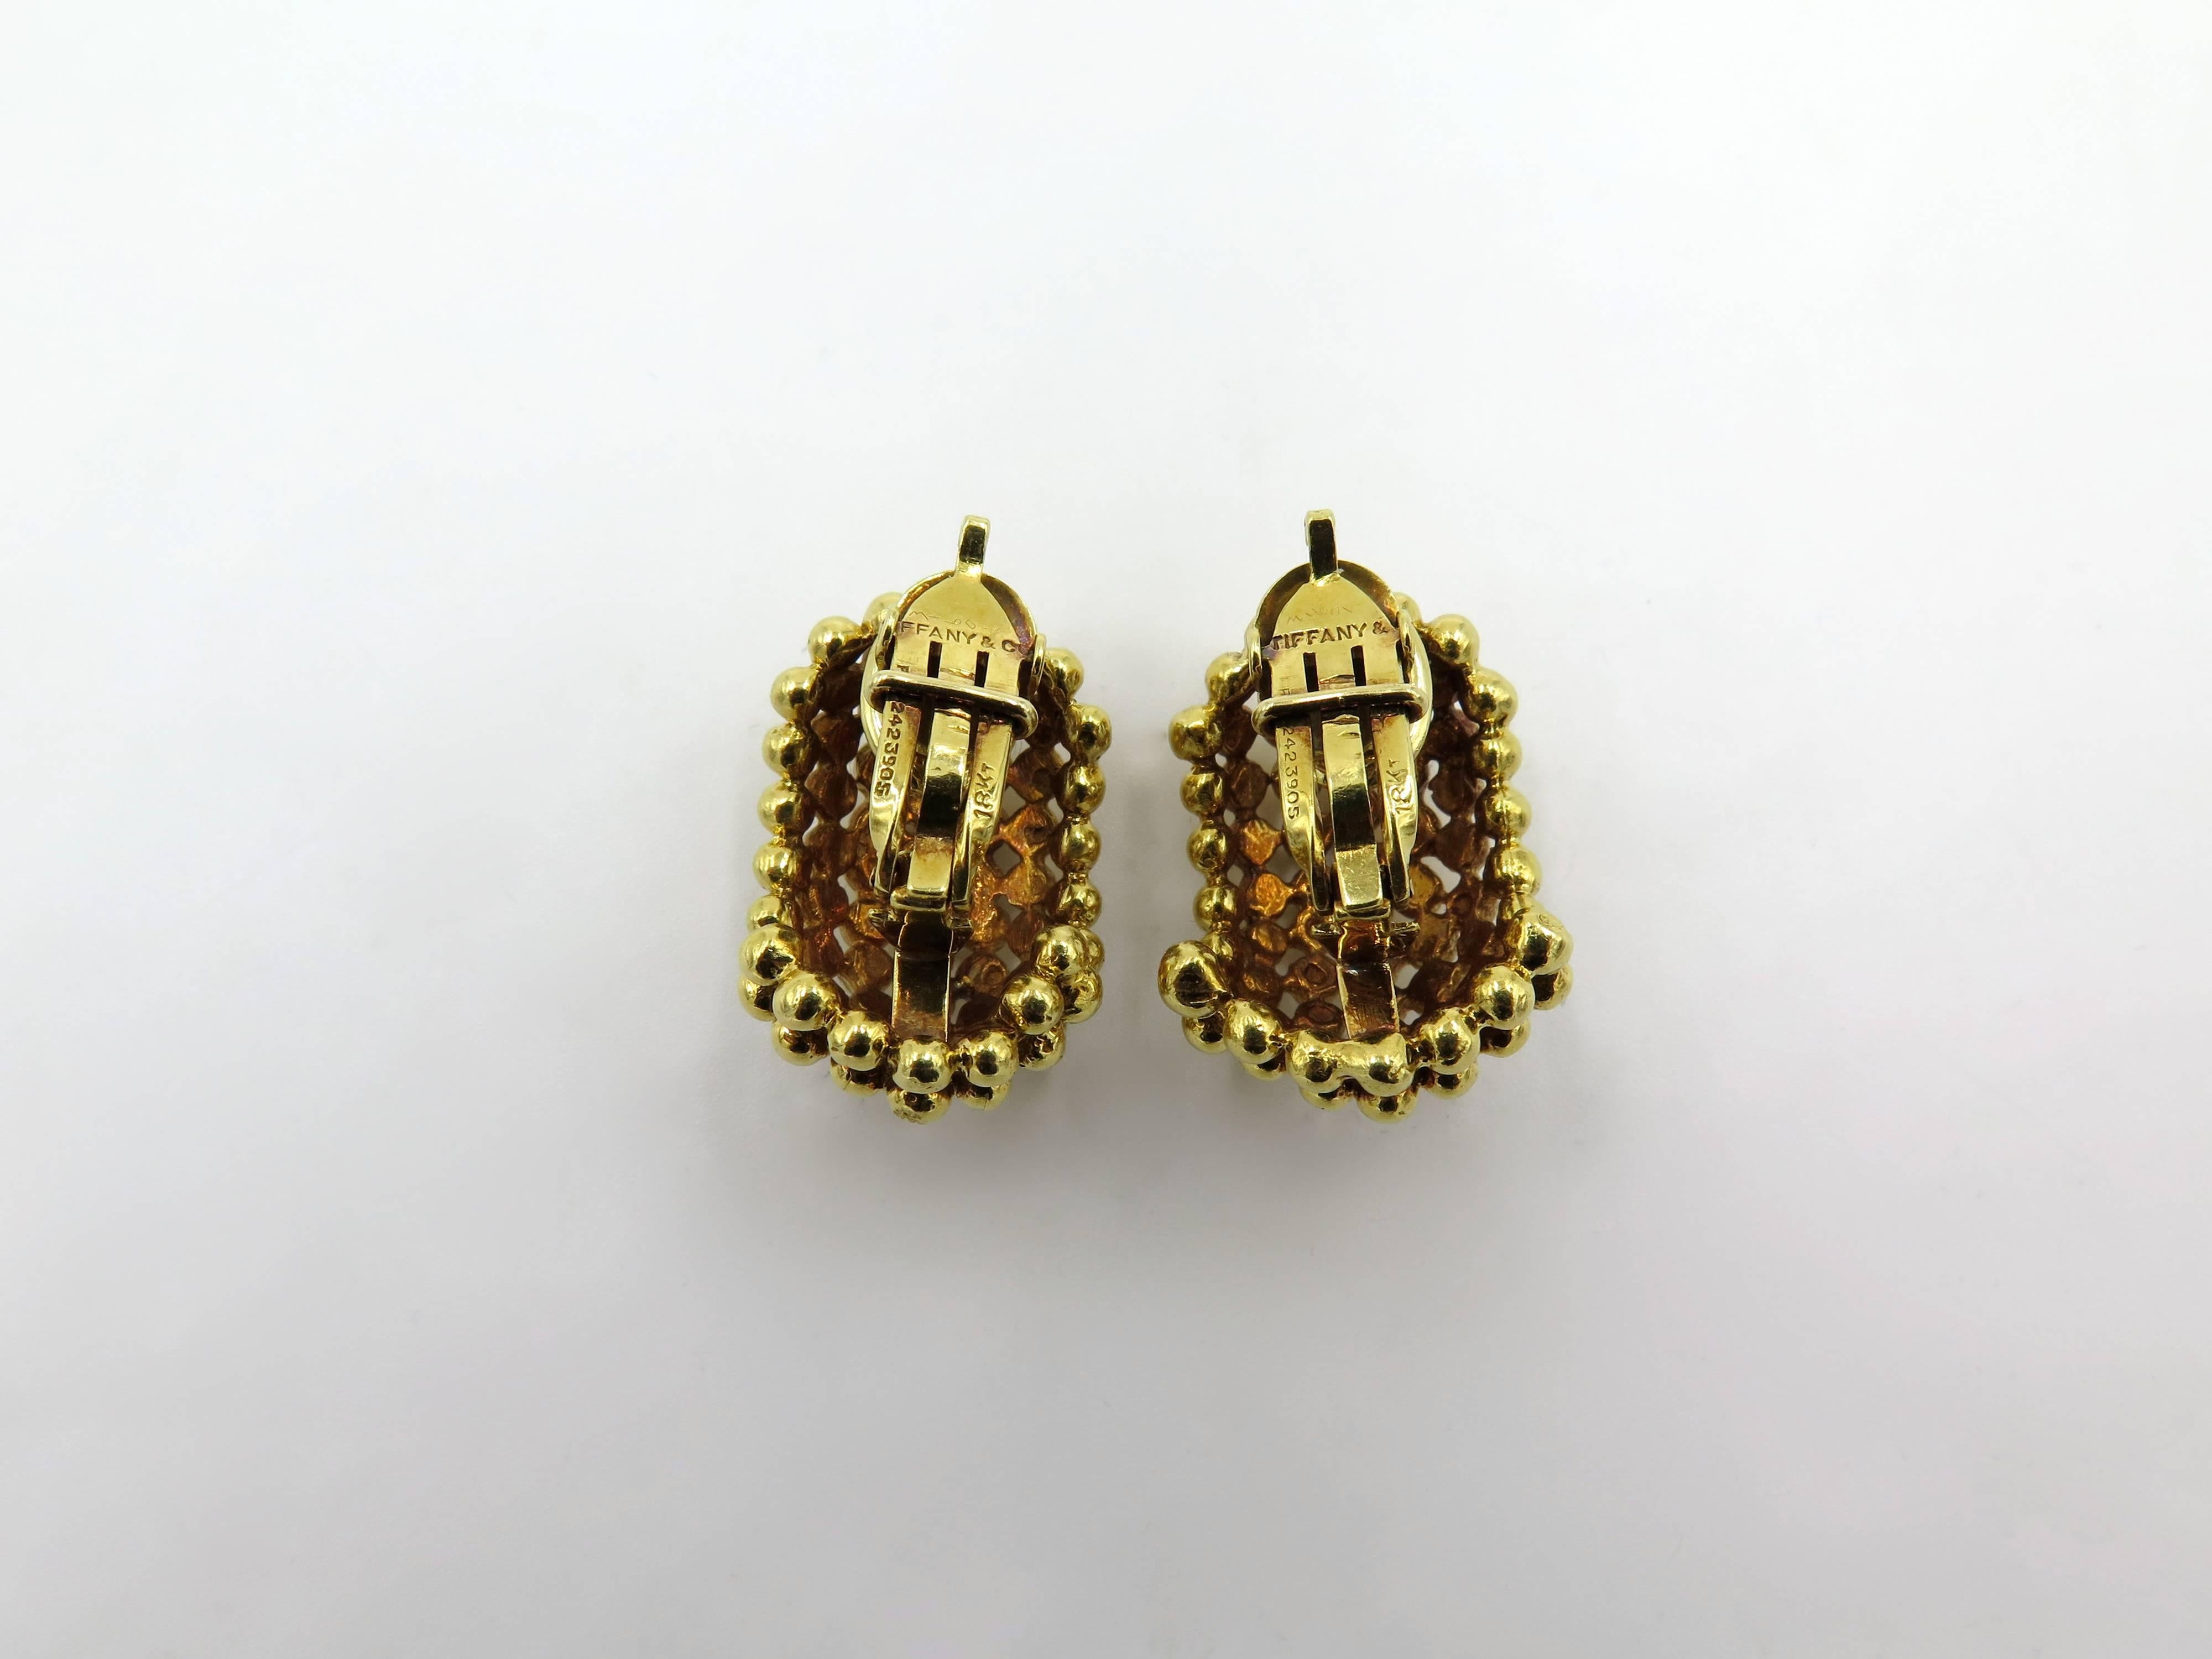 A pair of 18 karat yellow gold earrings. Tiffany & Co. Circa 1980. Designed as a beaded bombe half hoop. Length is approximately 1 inch. Gross weight is approximately 29.3 grams. Numbered 31601.